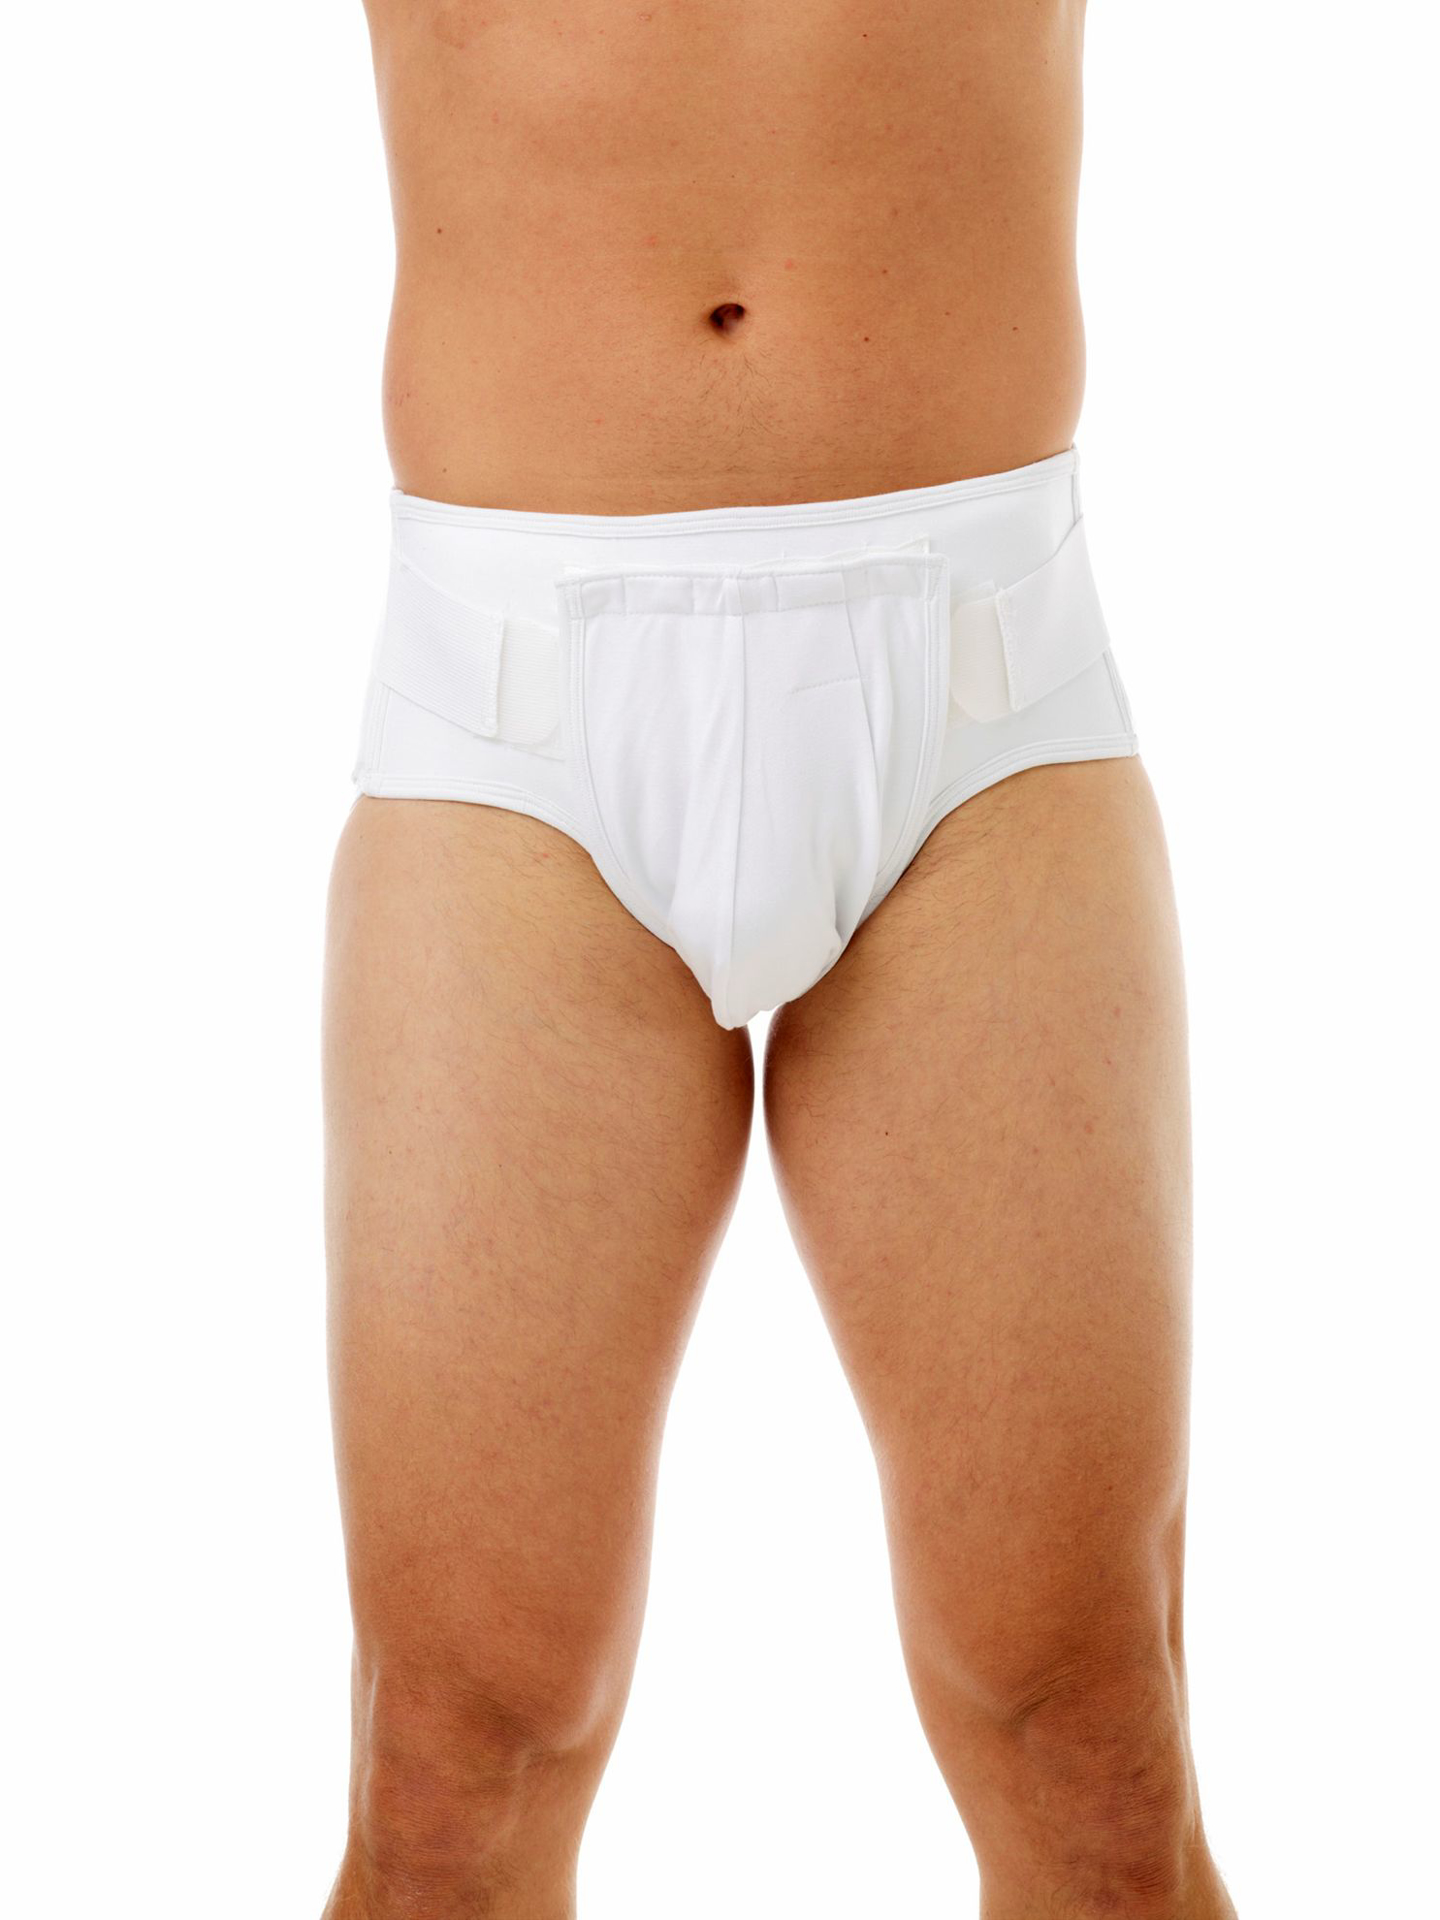 Men's Inguinal Hernia Brief with Hot & Cold Therapy Gel Pads